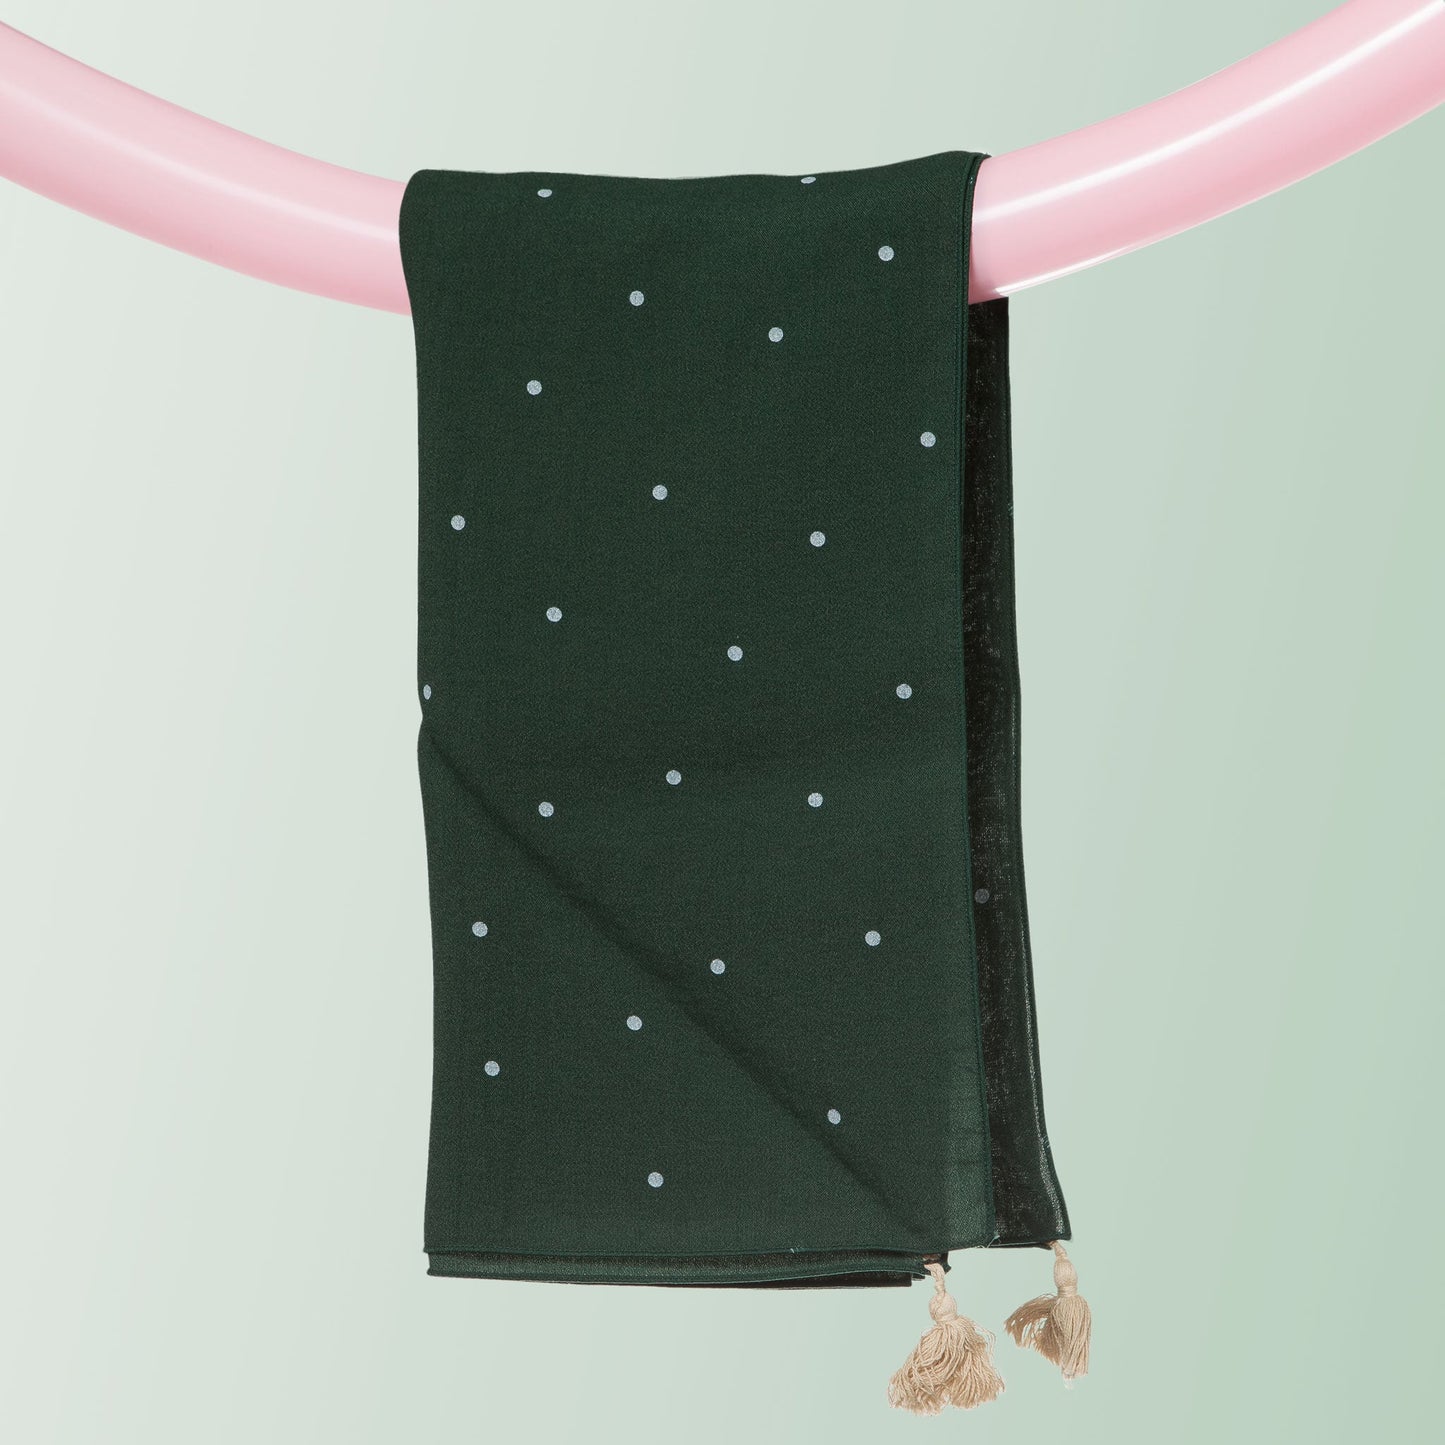 Vogue Dot Square Scarf with Tassels (Forest Green)